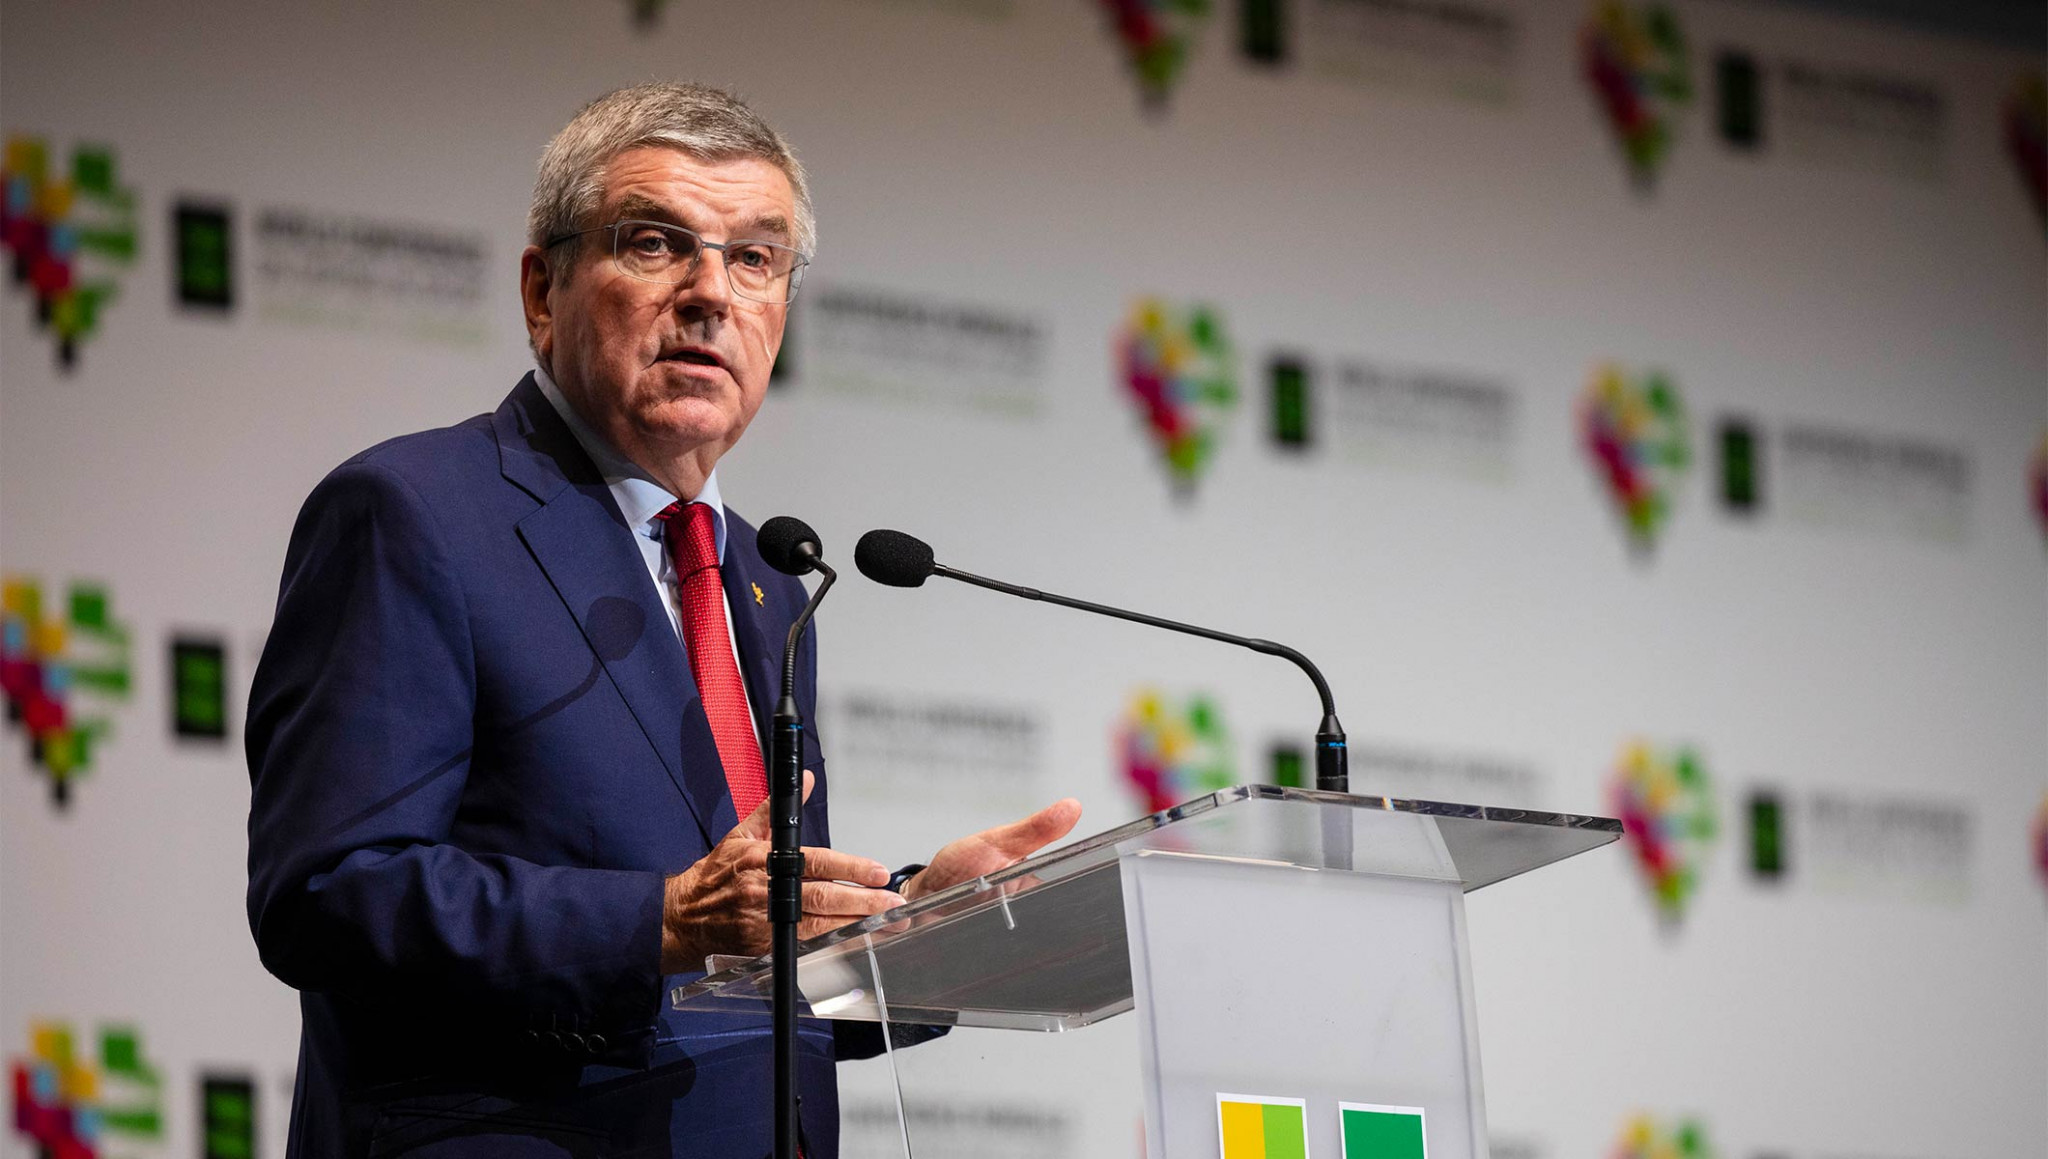 International Olympic Committee President Thomas Bach announced they were giving WADA another $10 million to help fight doping ©IOC